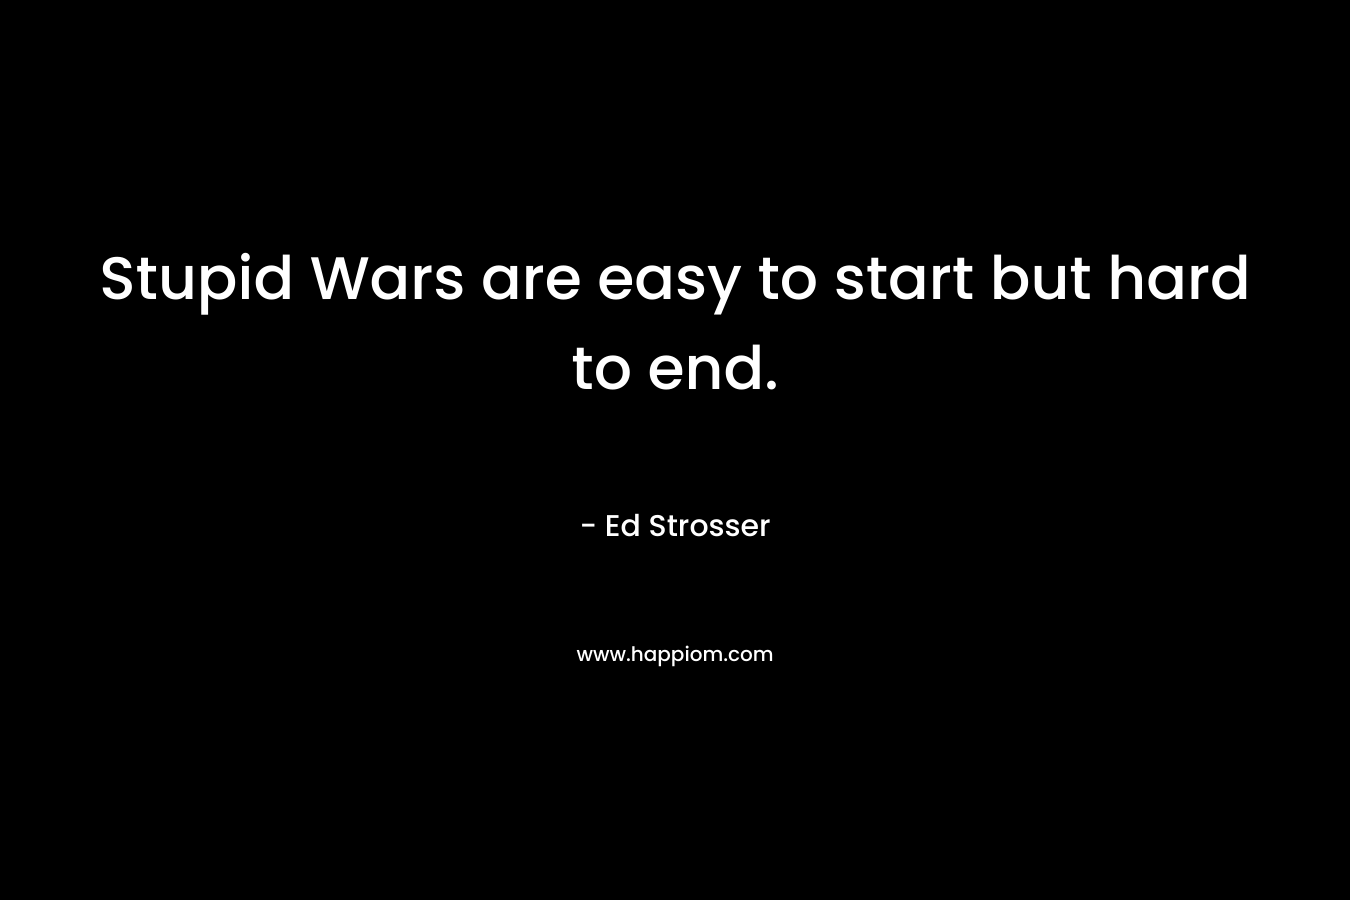 Stupid Wars are easy to start but hard to end.